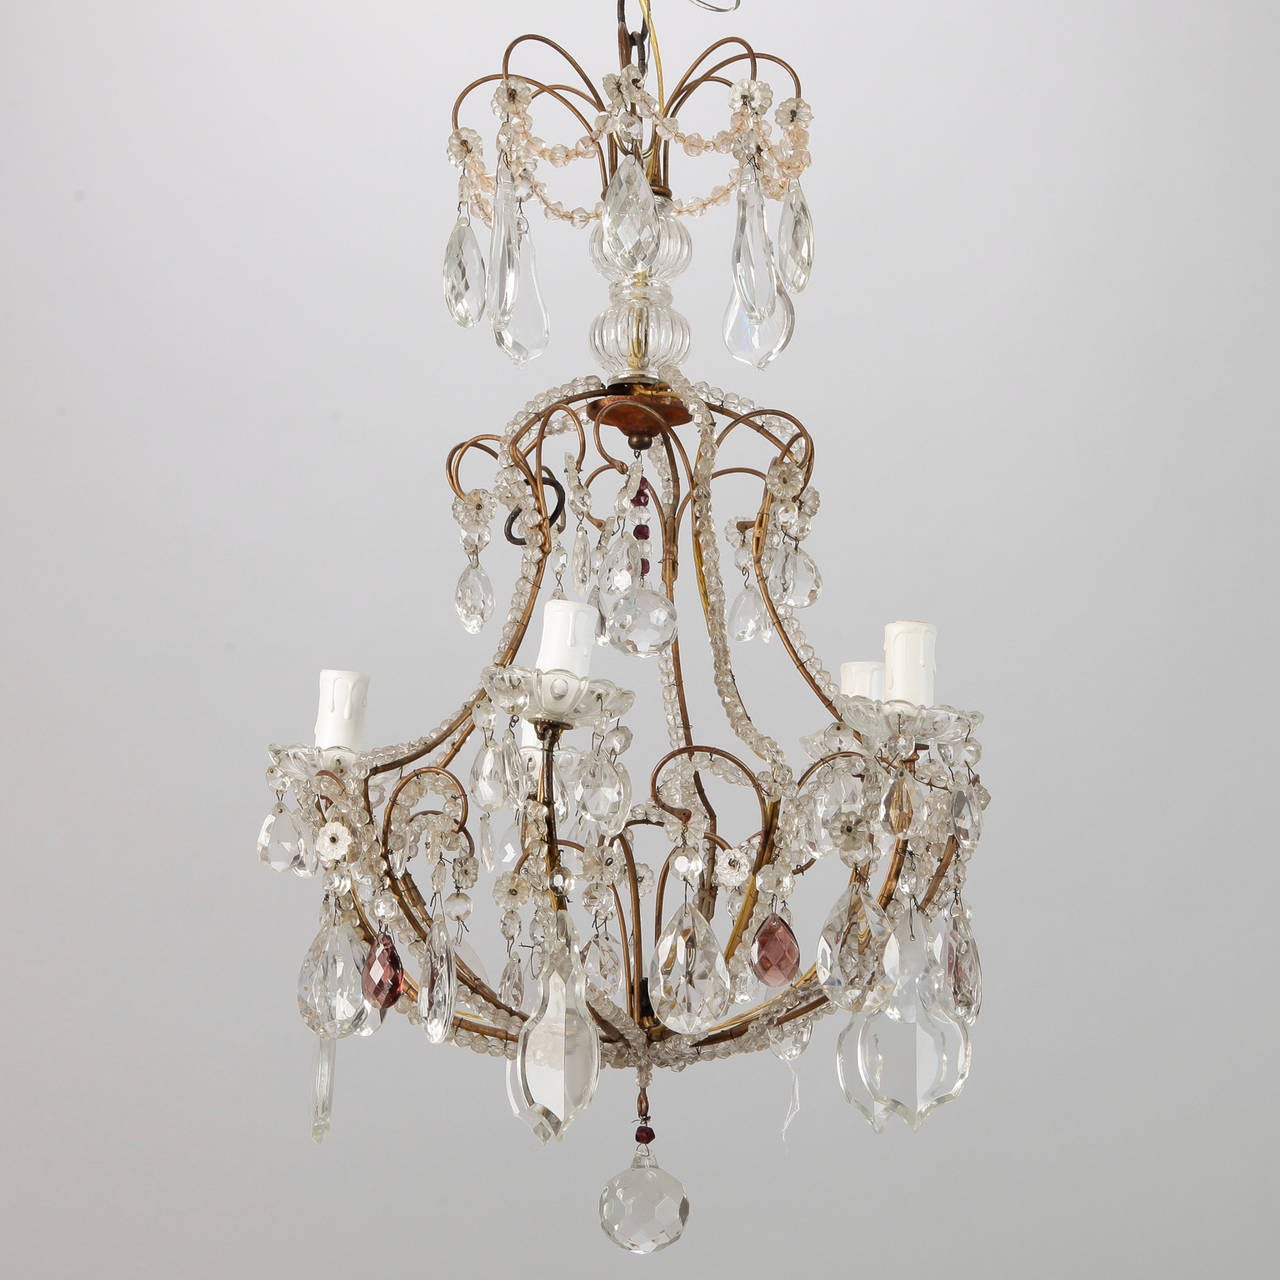 Circa 1920s French chandelier has a brass, cage-shaped frame with five candle style lights, three tiers of clear, faceted crystal pendants with amethyst accents and beaded arms. New electrical wiring for US standards.